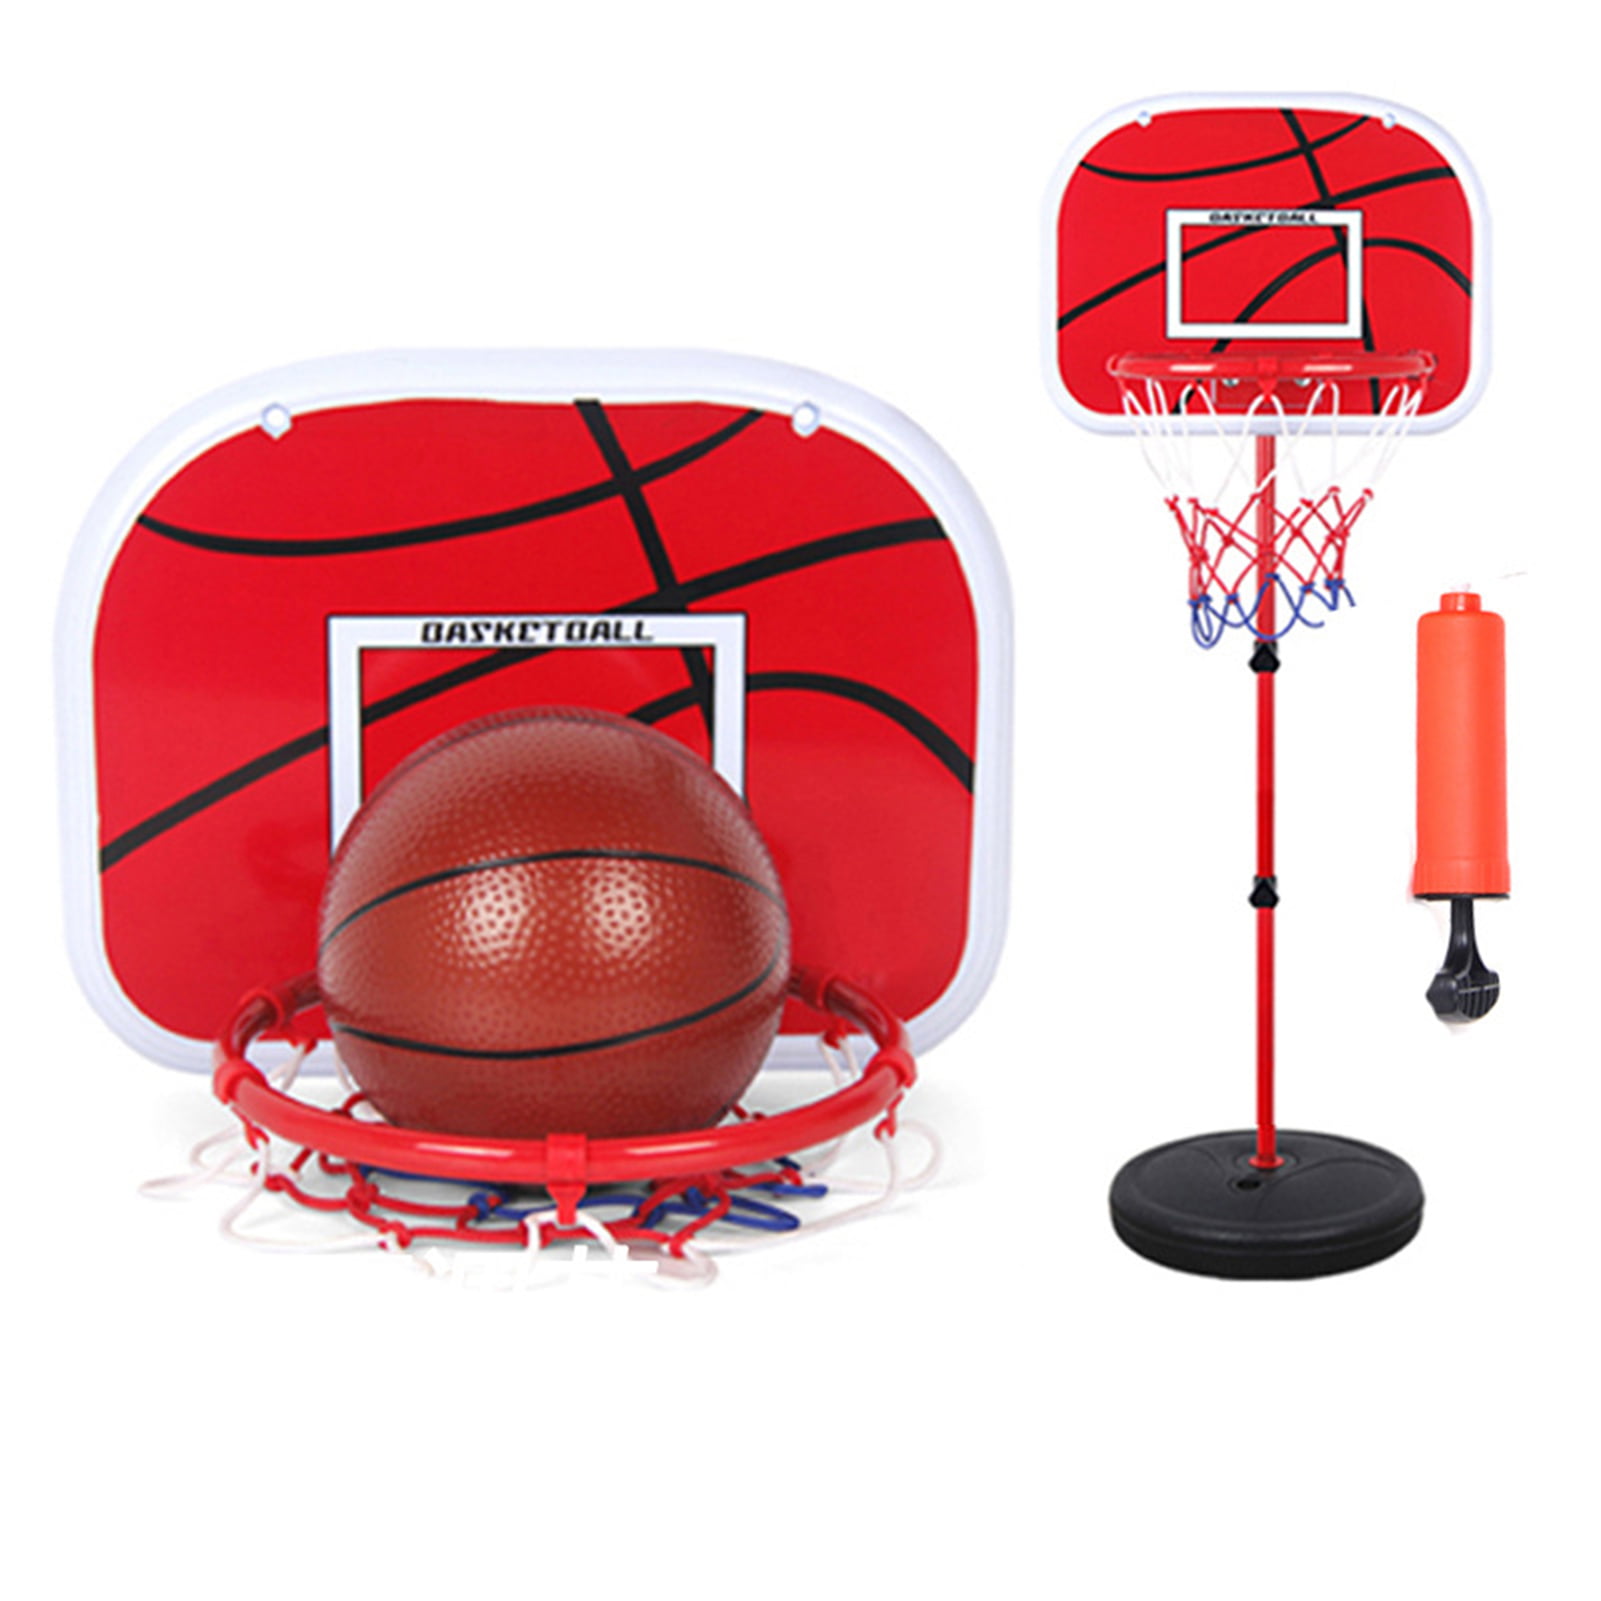 Basketball Hoop Outdoor,Adjustable Hight from 5-7 FT,Toys Gifts for Kids Boys Girls Teens 